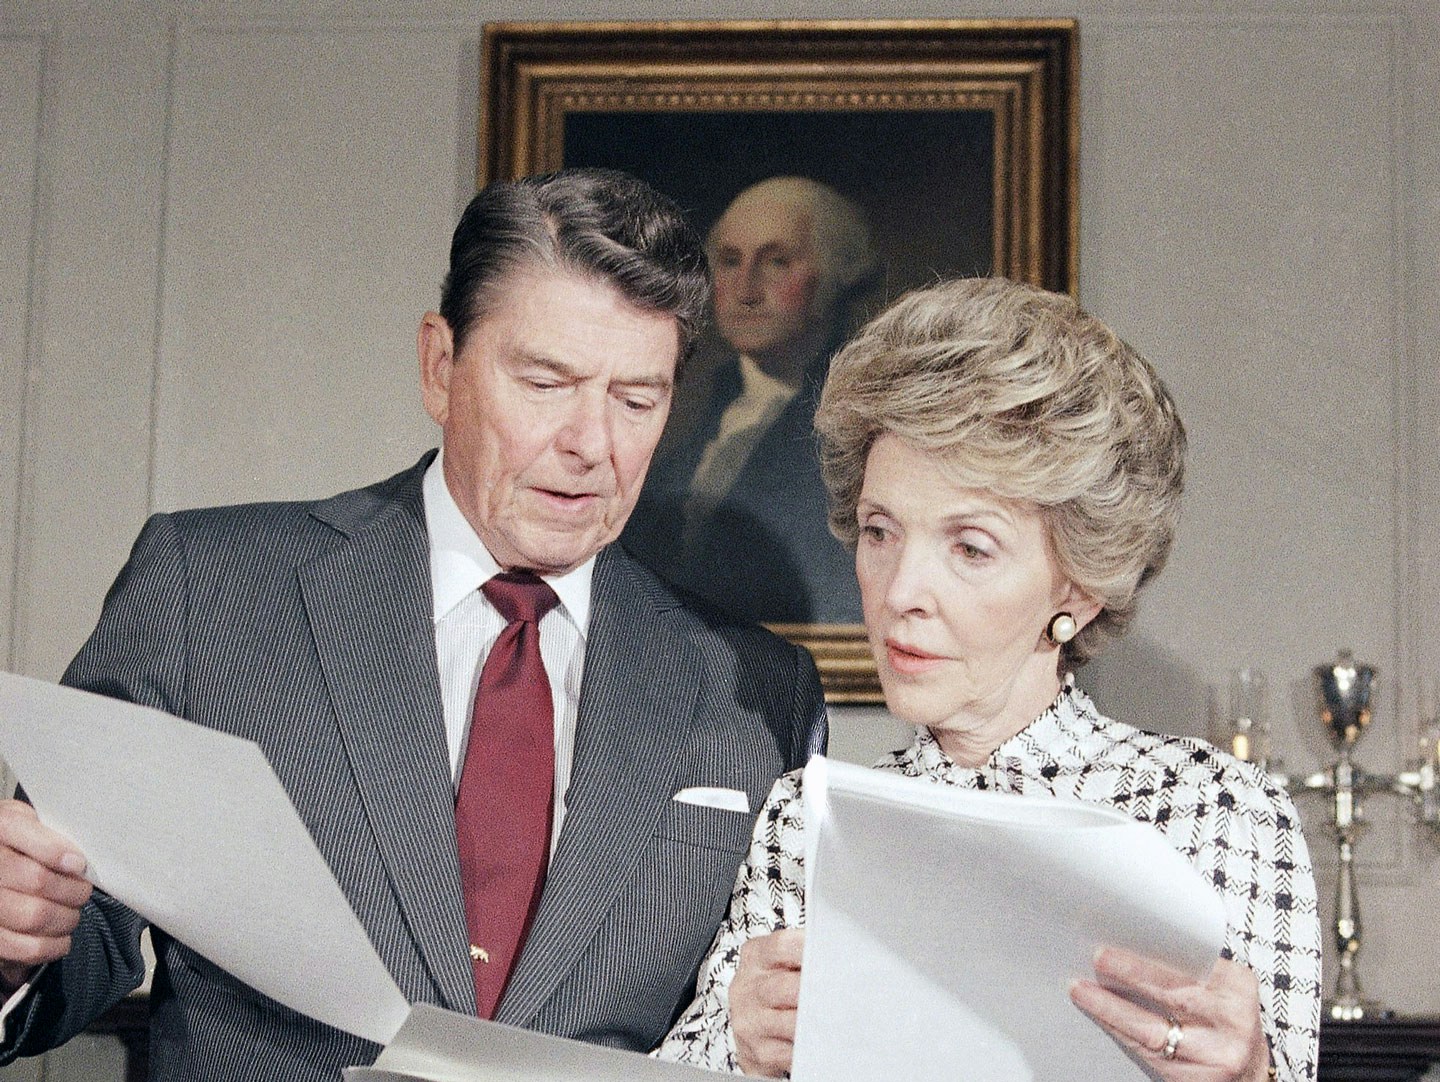 President Ronald Reagan and Mrs. Nancy Reagan go over their joint address which they will give to the nation, at the White House in Washington on Sept. 13, 1986. The address, which will be seen nationally on Sunday, will focus on the war against drug abuse. (AP Photo/Charles Tasnadi)